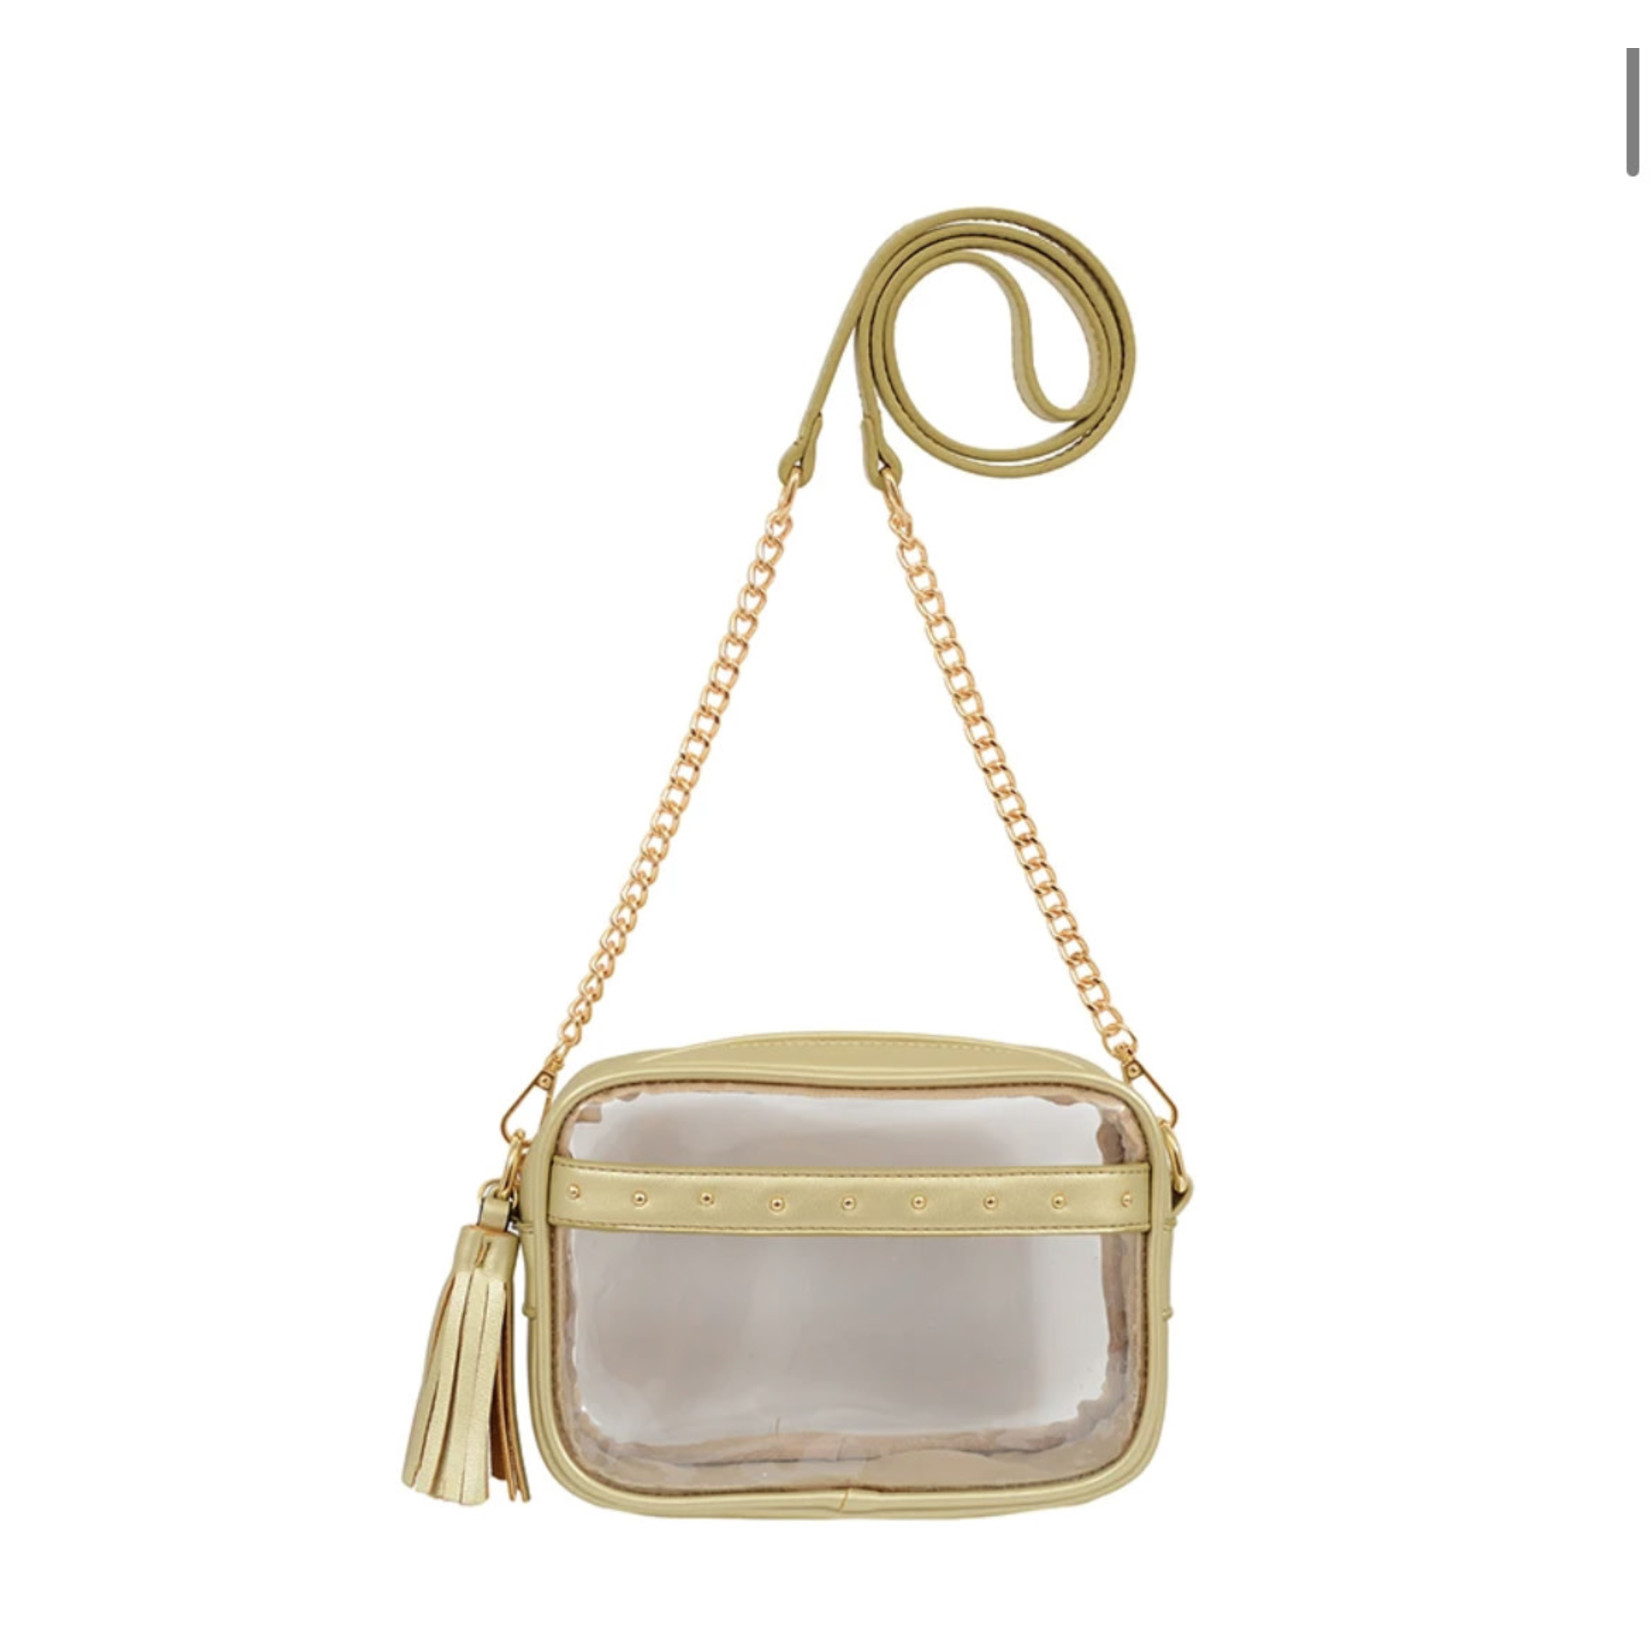 The Kelly Clear Purse